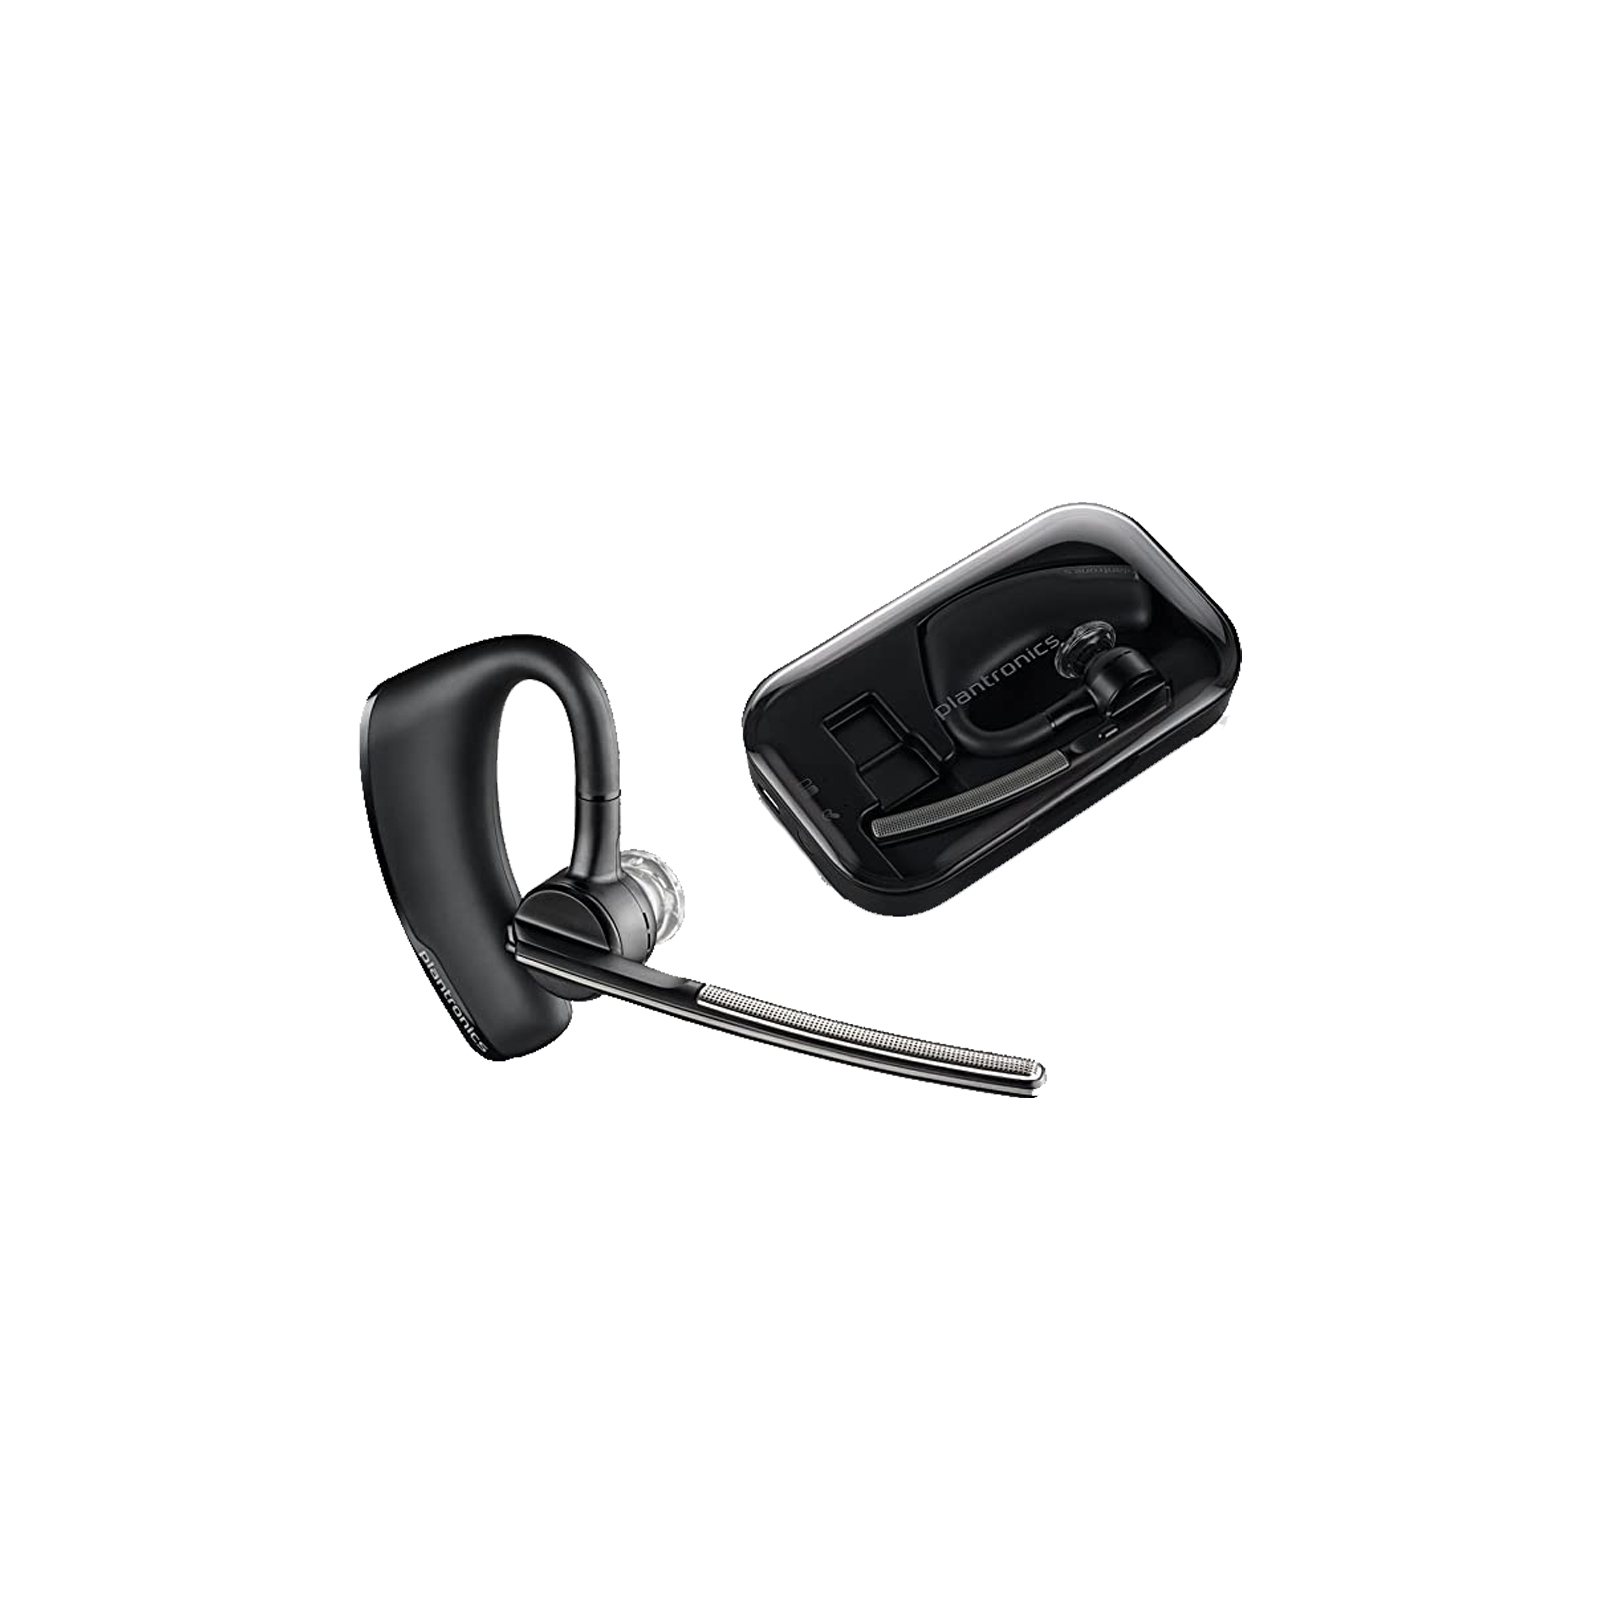 Plantronics Voyager Legend [Bluetooth Headset] [With Case] [Brand New]